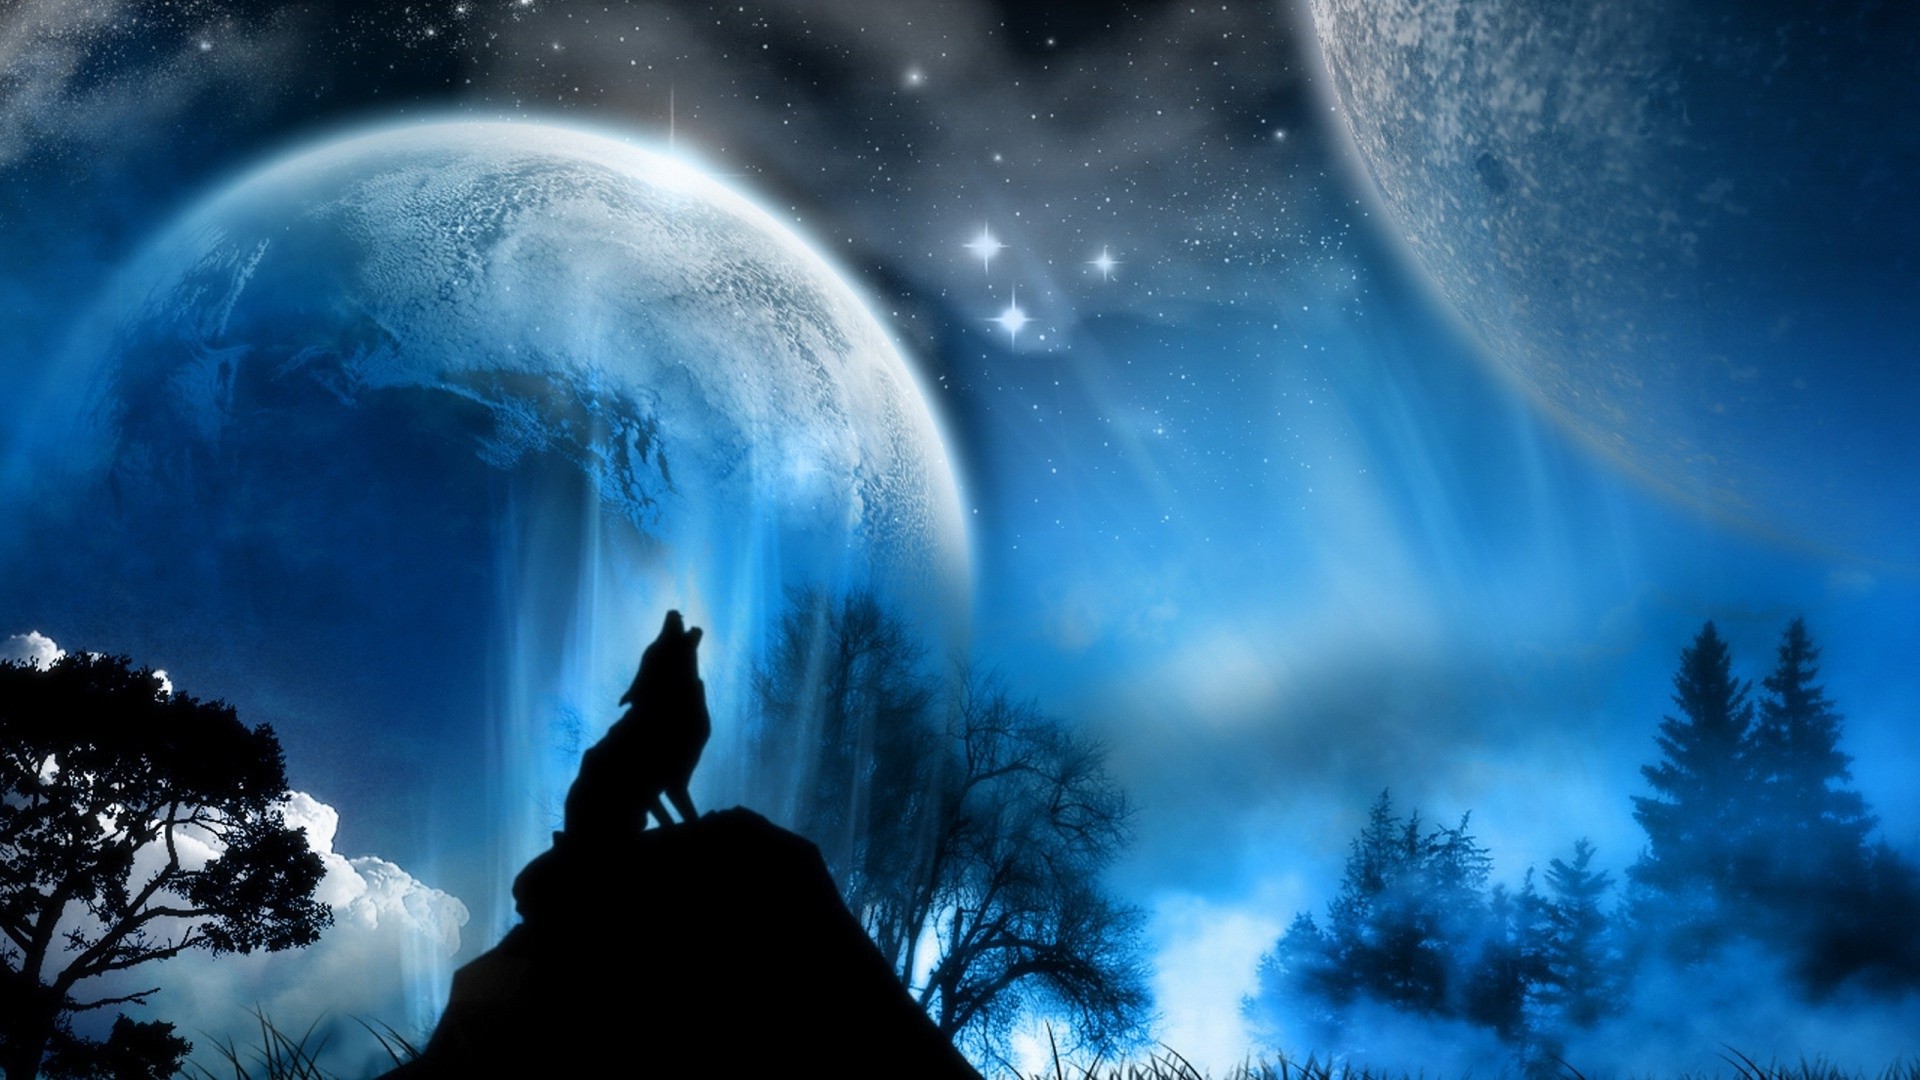 Wolf Howling at Full Moon Wallpaper